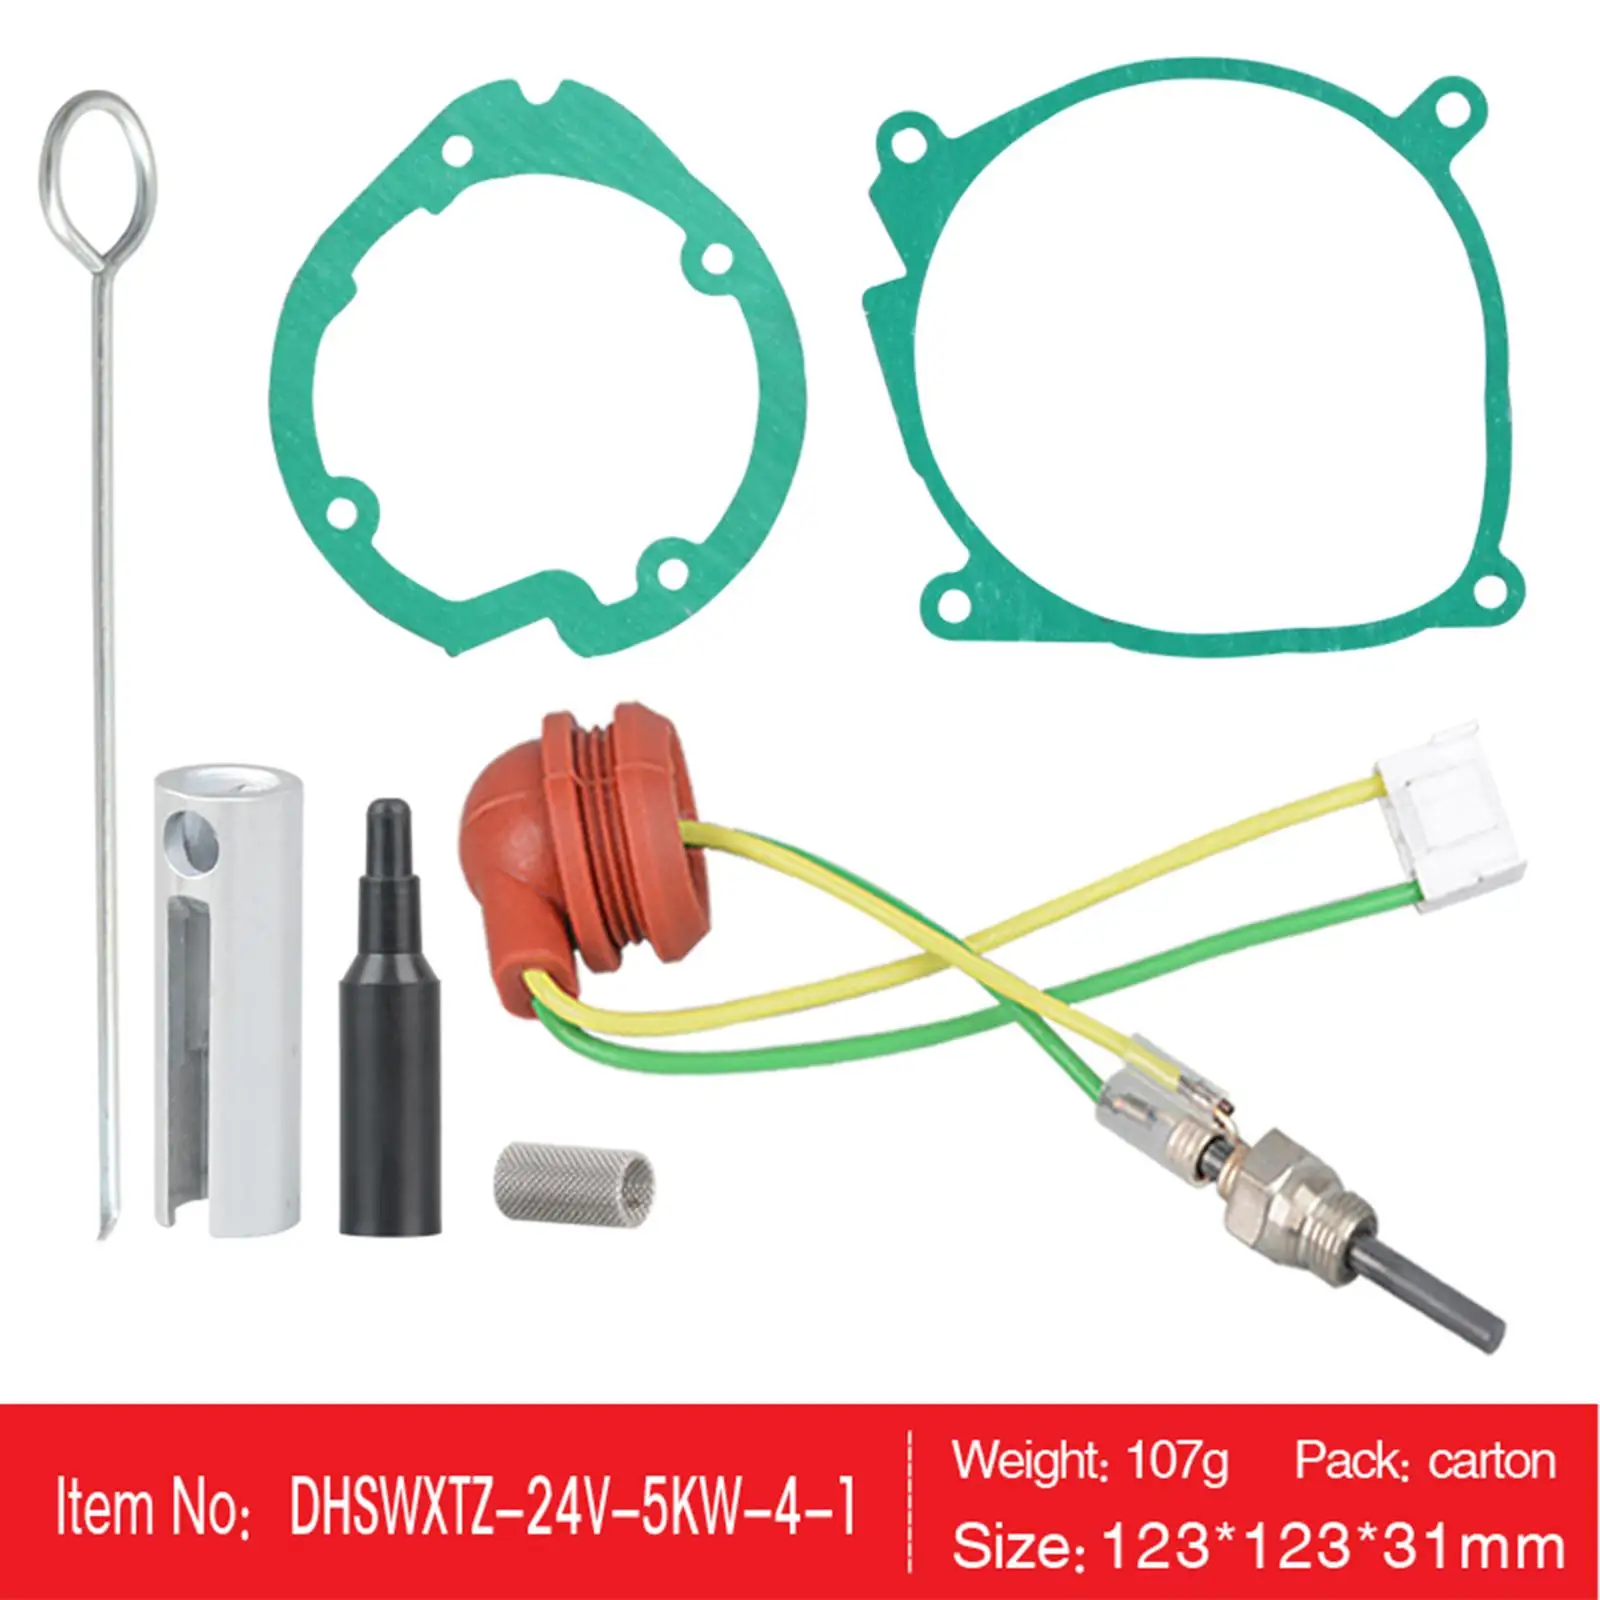 Glow Plug Repair Kit Truck Replaces Wrench for 24V 5kW Parking Heater